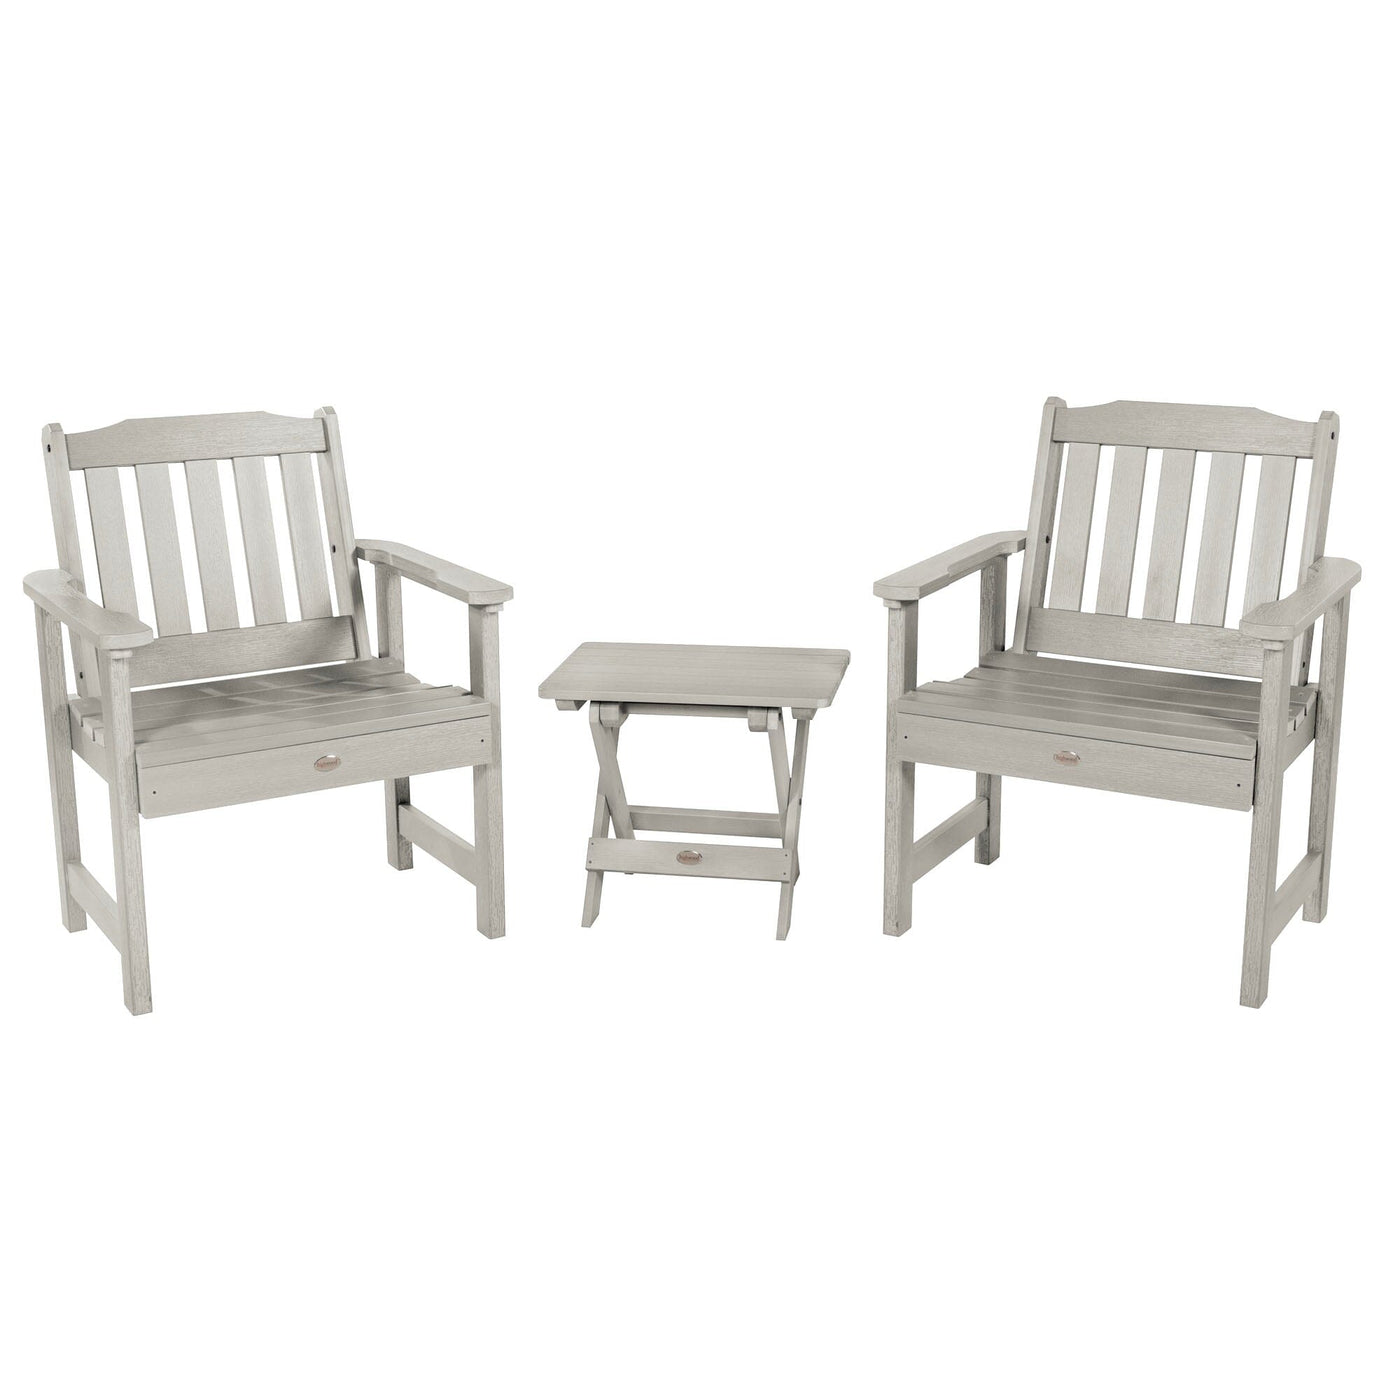 2 Lehigh Garden Chairs with Folding Adirondack Side Table Kitted Sets Highwood USA Harbor Gray 